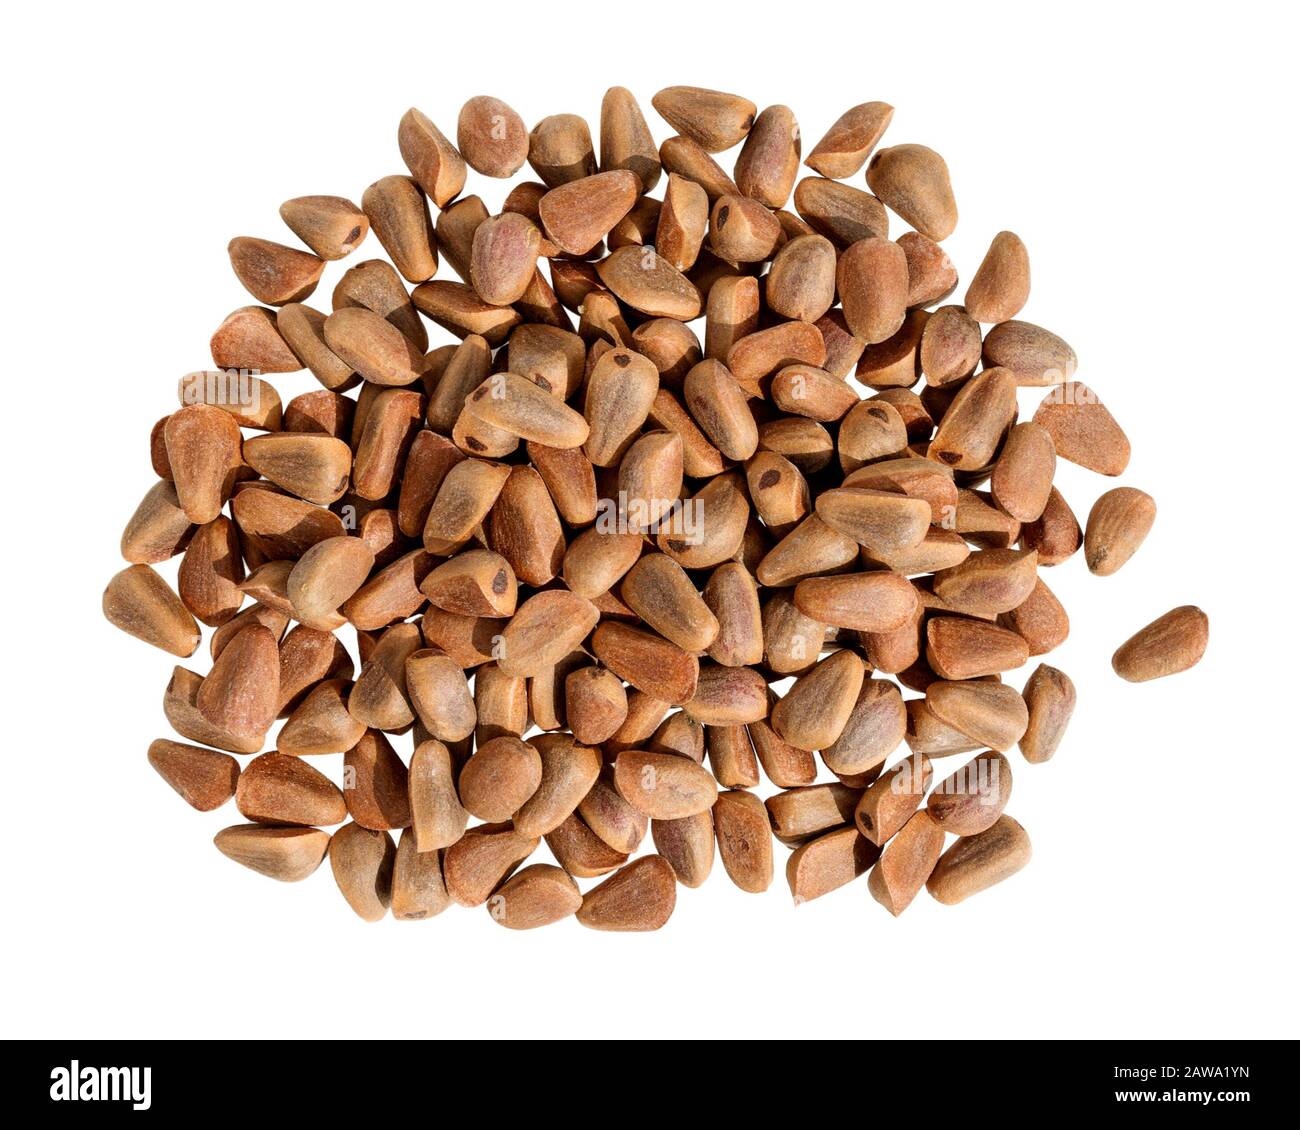 Forest Nuts High Resolution Stock Photography and Images - Alamy